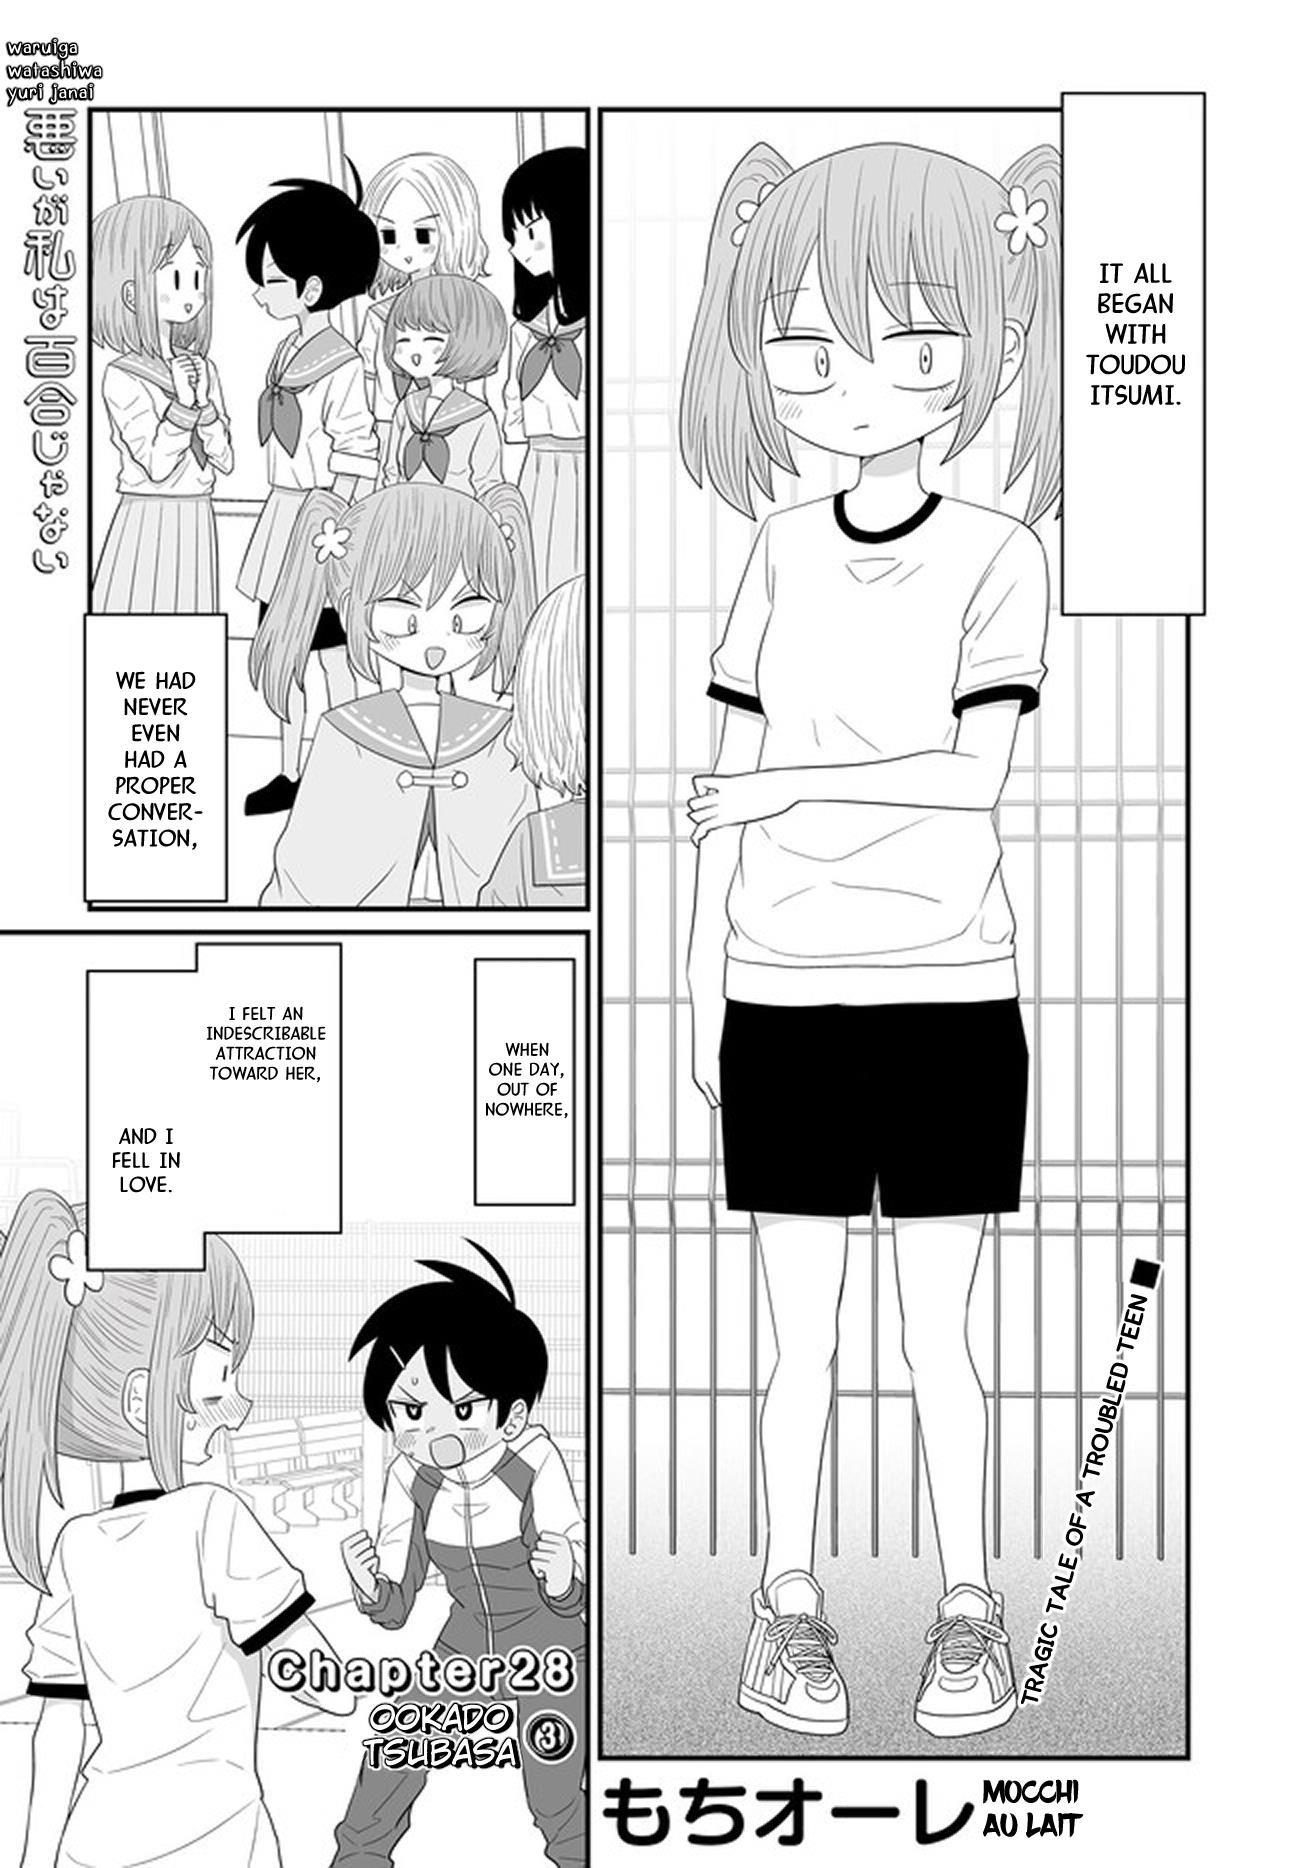 Sorry But I'm Not Yuri - chapter 28 - #1